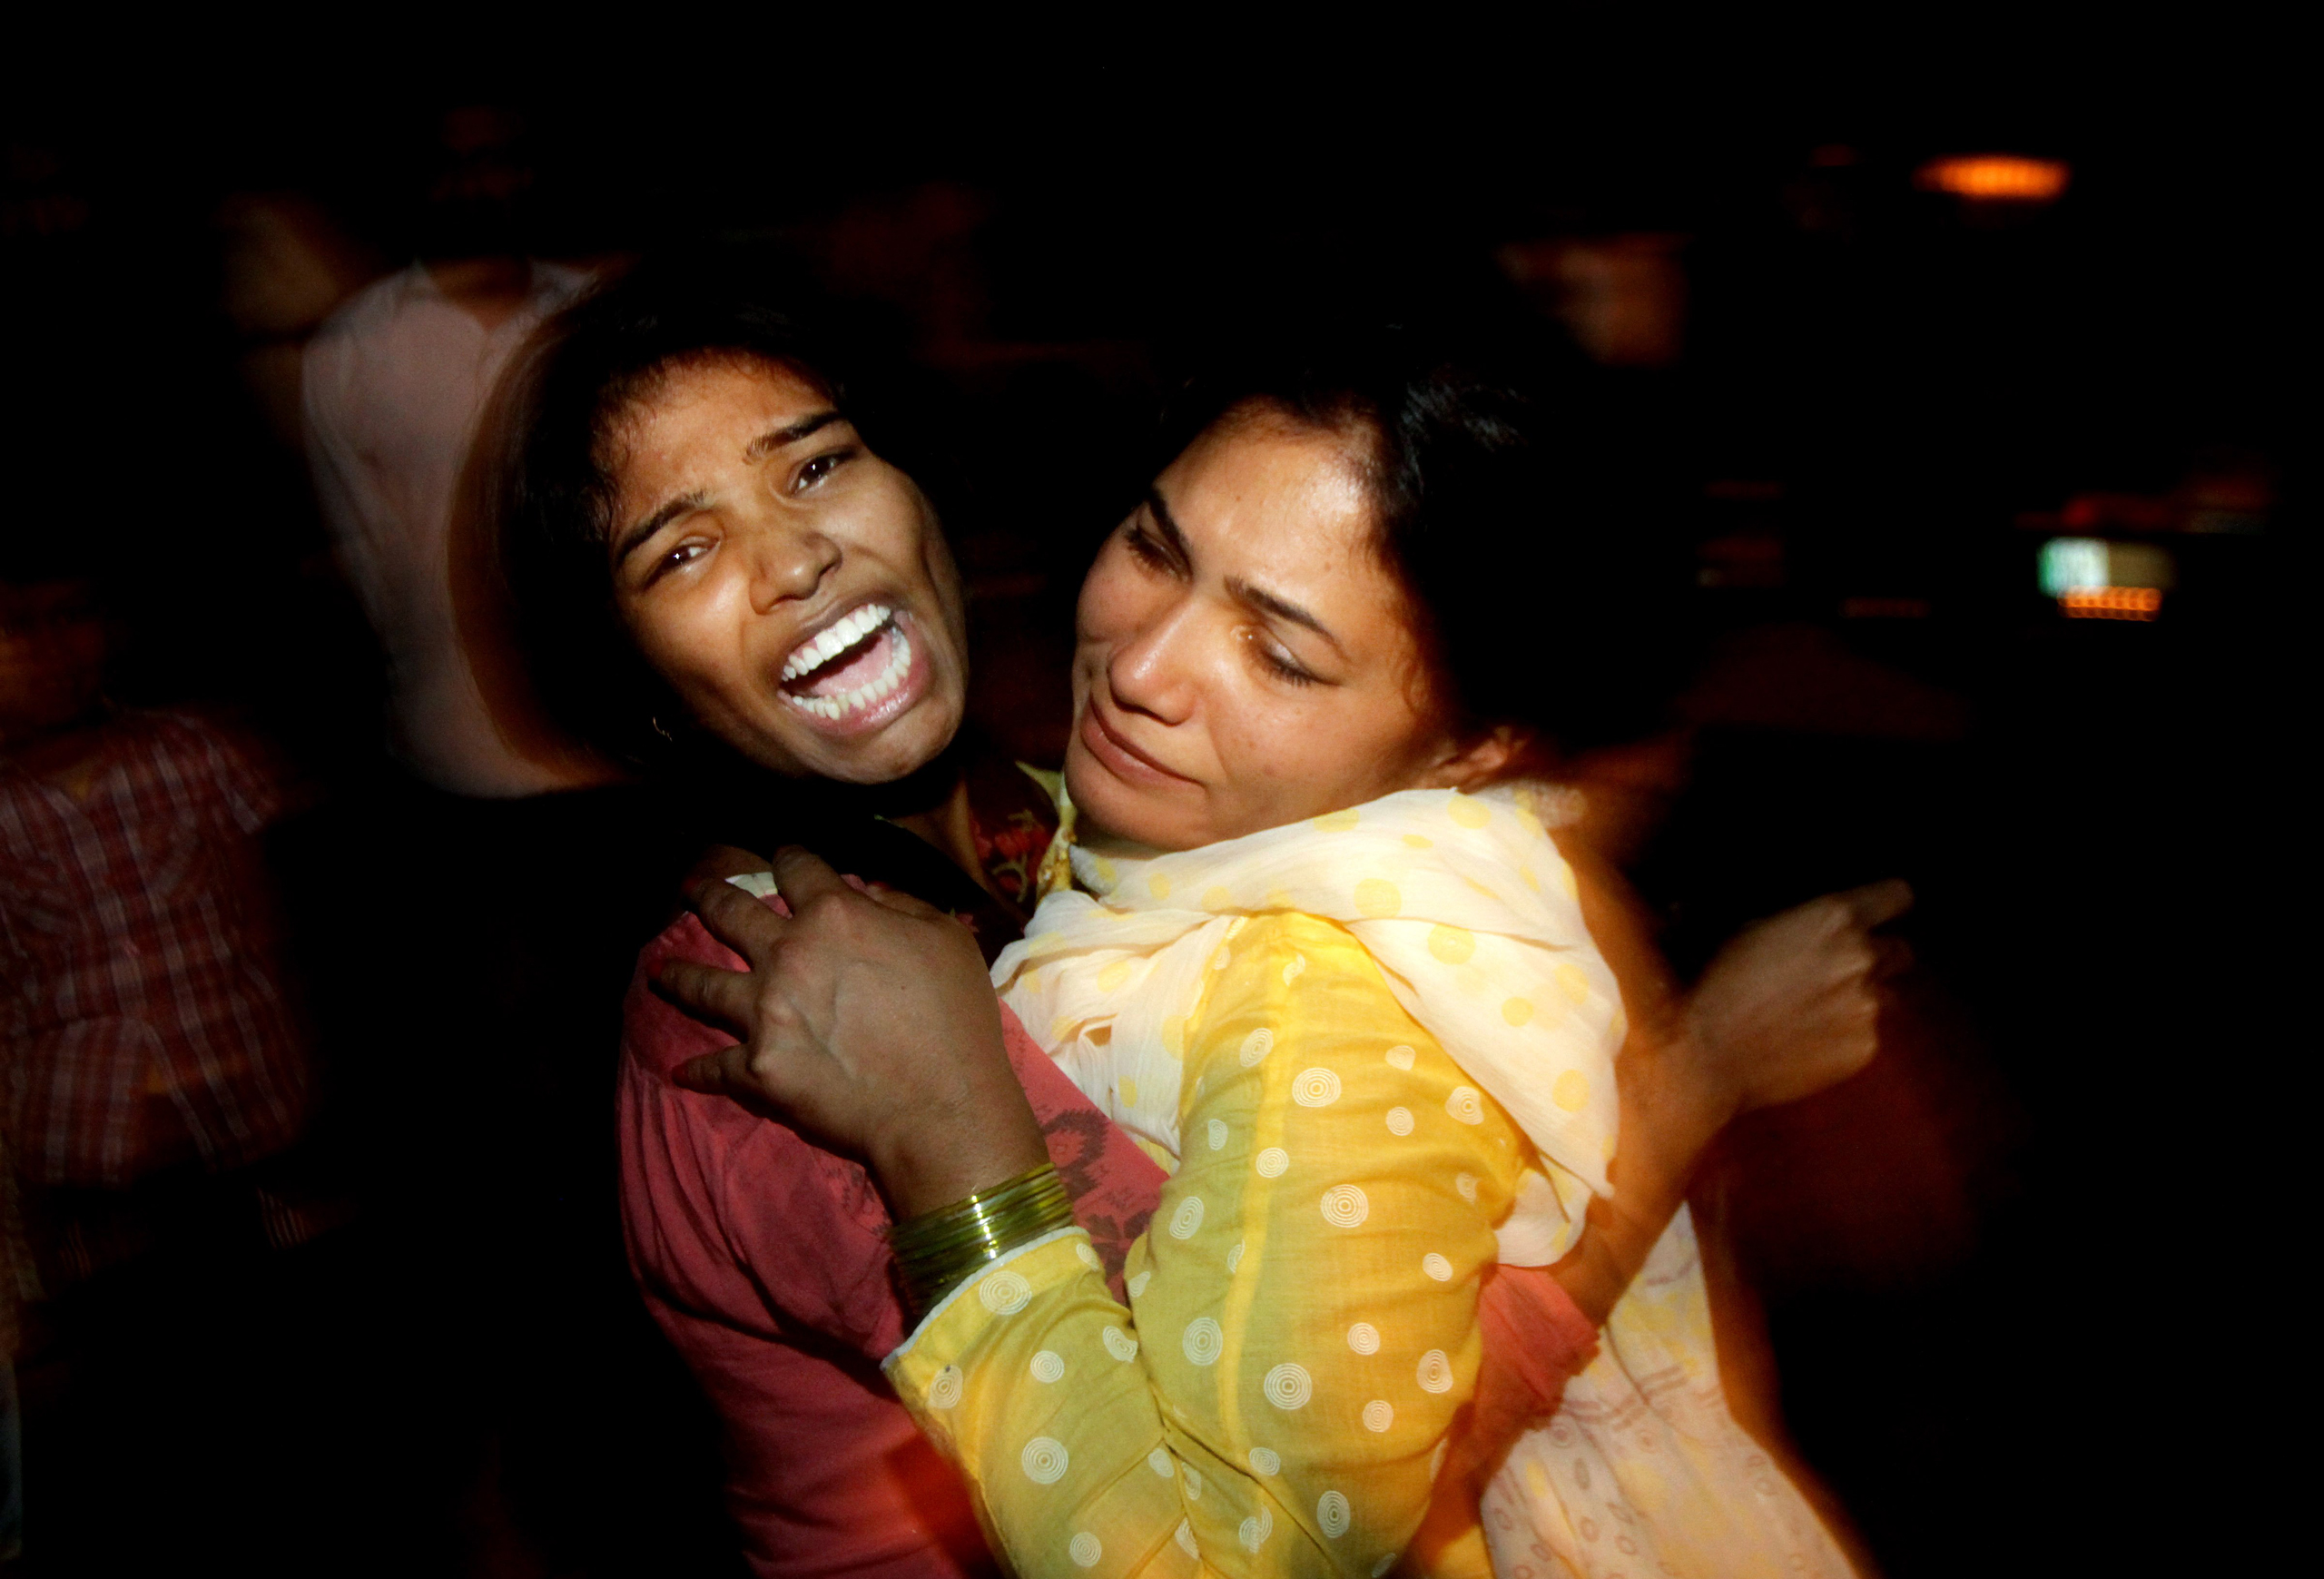 Women comfort each other as they mourn over the death of a family member who was killed in a bomb blast, at a local hospital in Lahore, Pakistan, on March, 27, 2016.